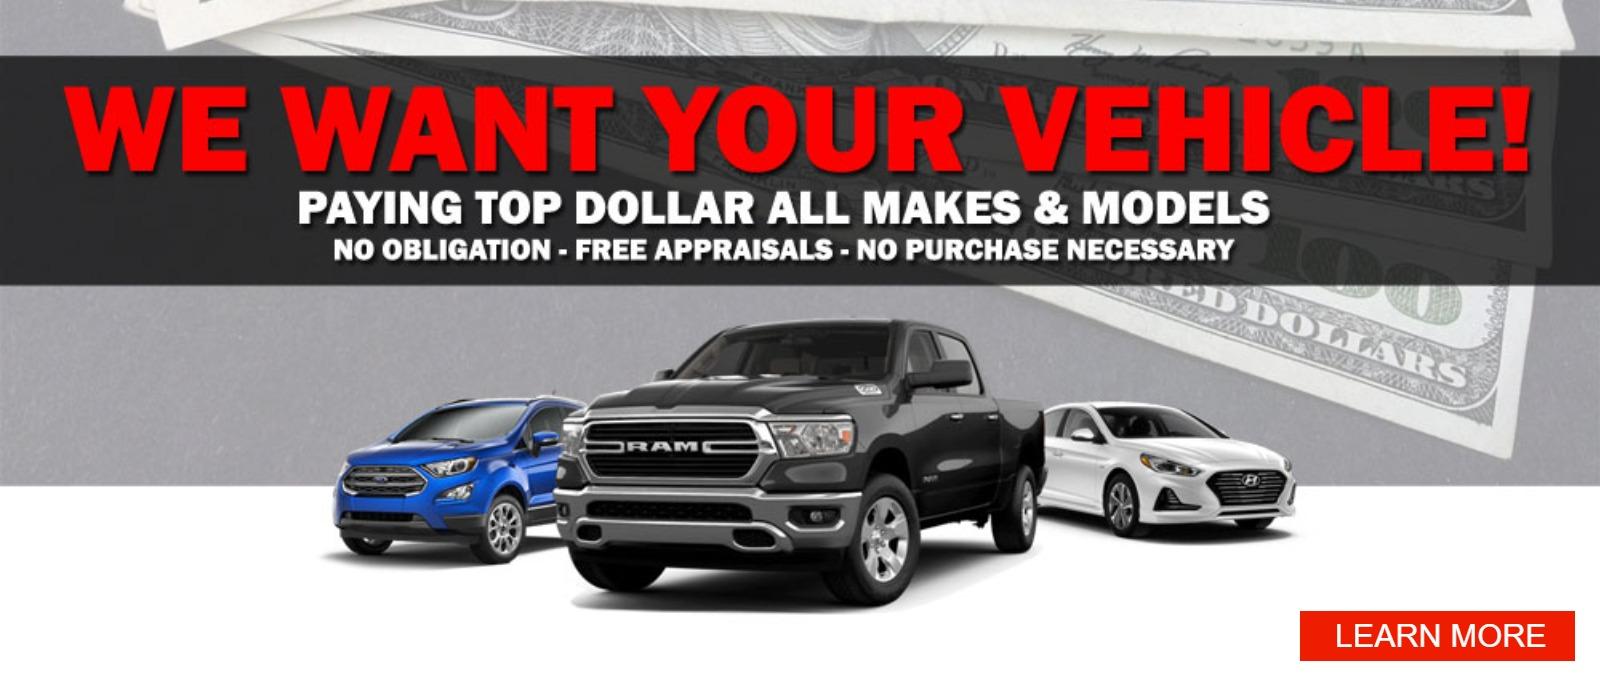 We Want Your Vehicle - Paying Top Dollar